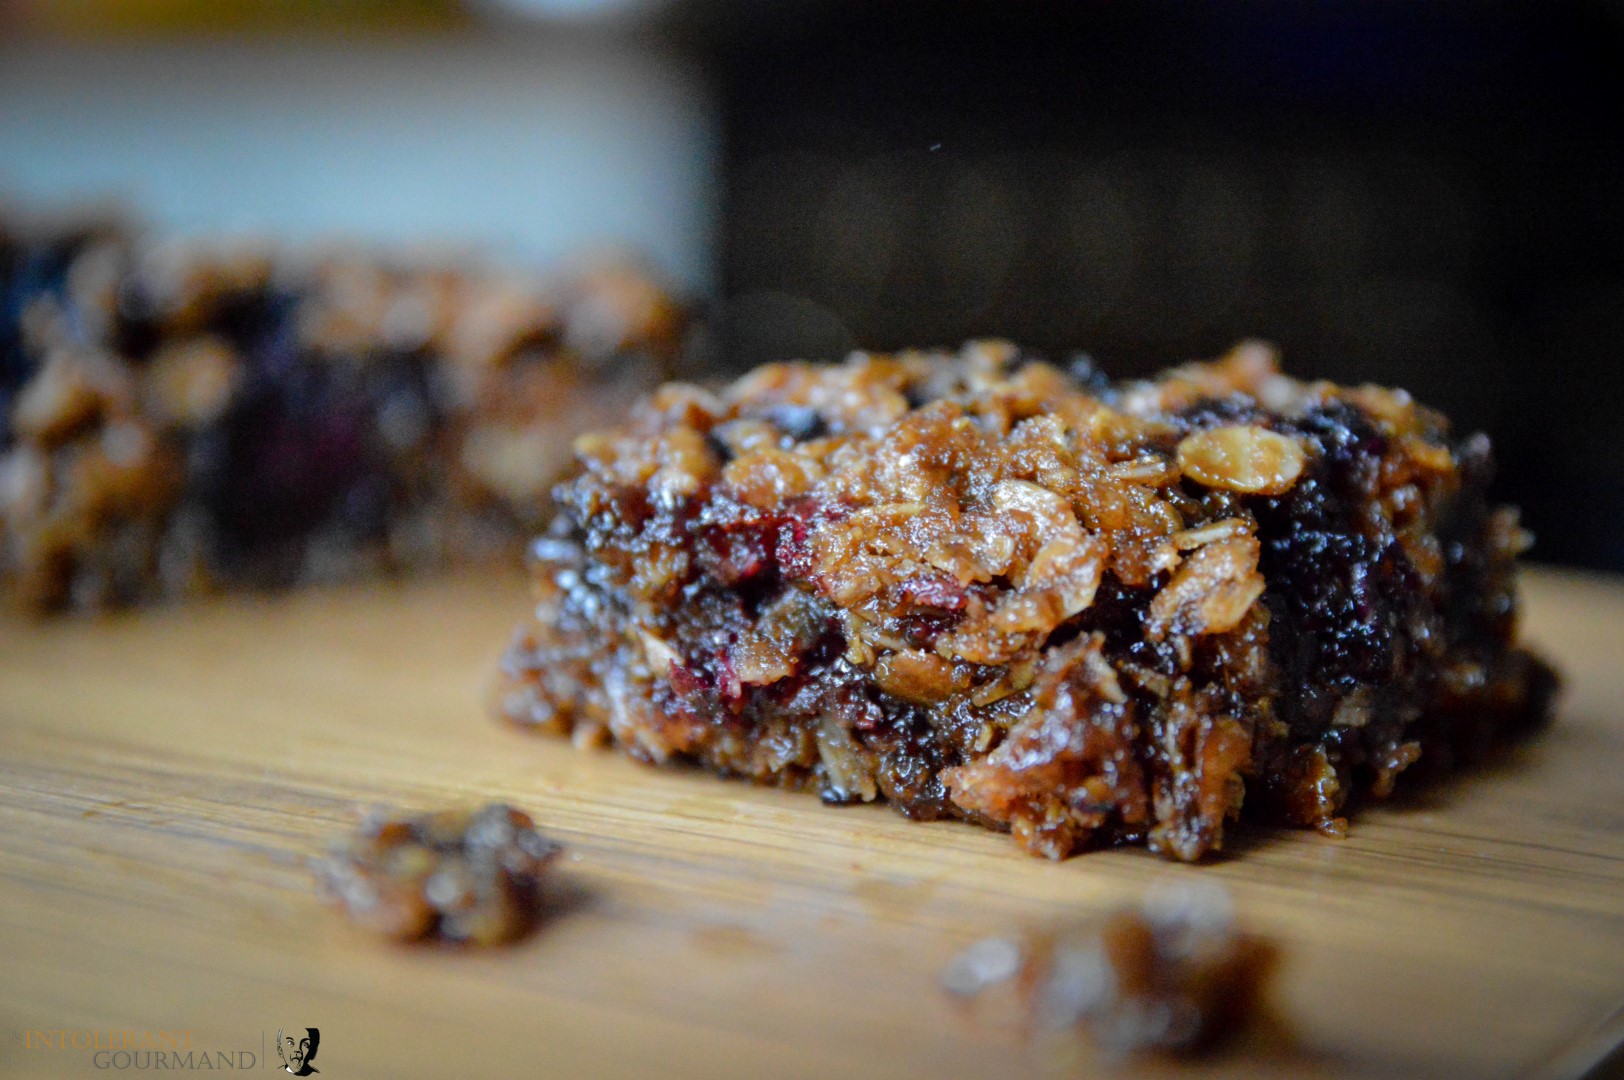 Blackberry flapjack - dairy-free, gluten-free blueberry flapjacks. Bursting with flavour, simple to make, and absolutely delicious! www.intolerantgourmand.com